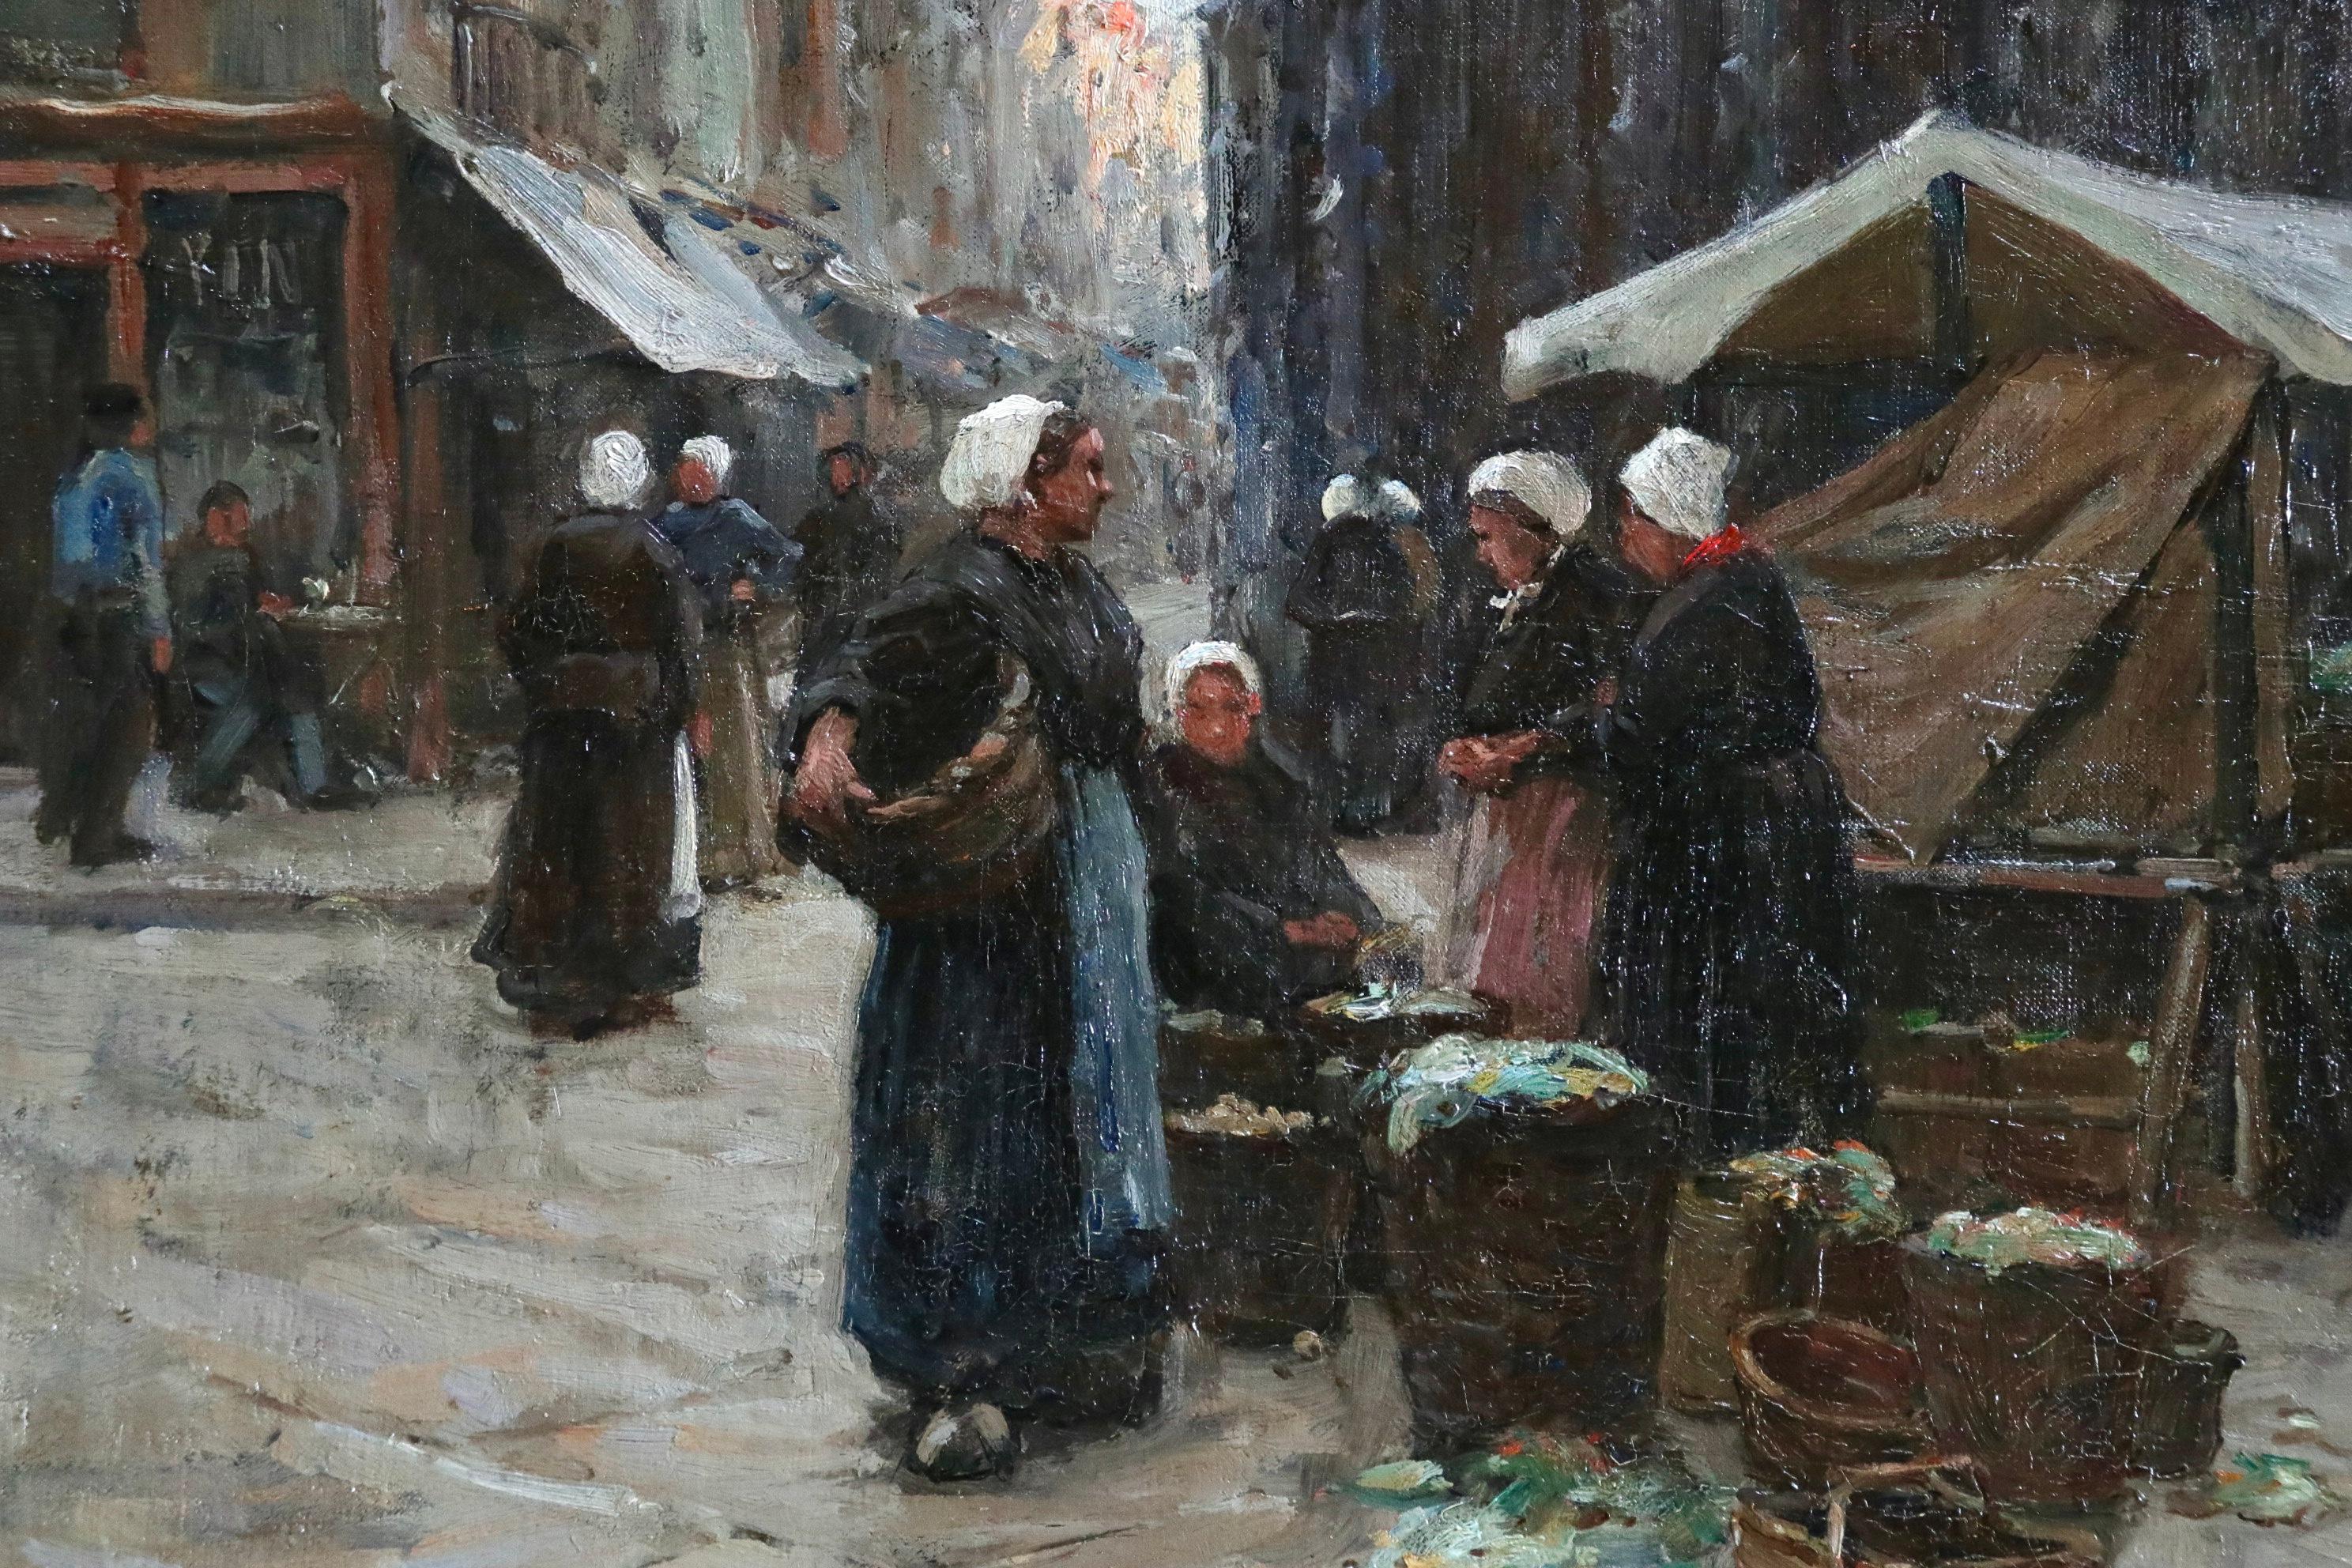 Market Day - Dieppe - 19th Century Oil, Figures in Cityscape by Terrick Williams 2